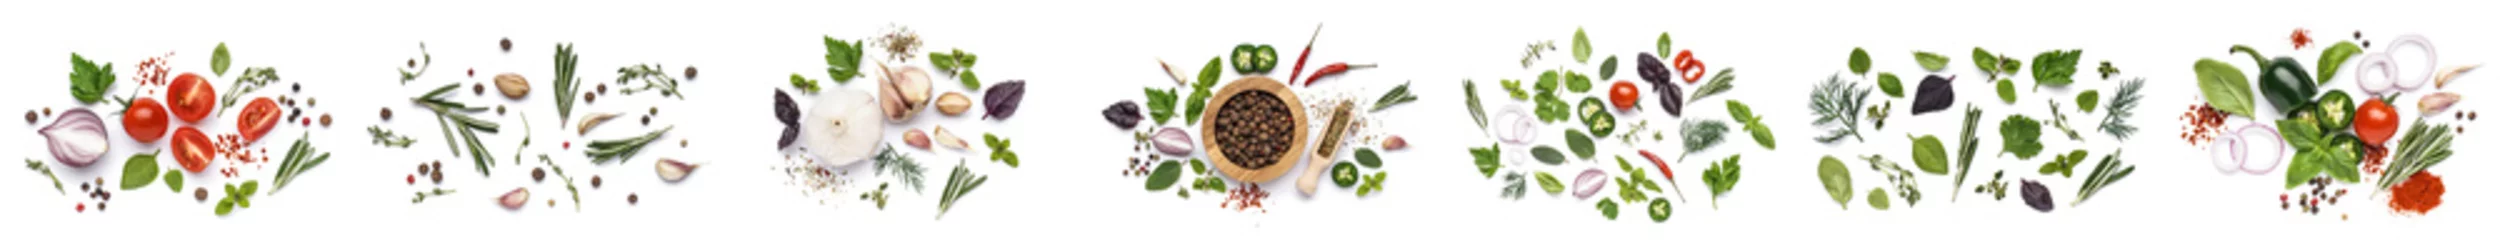 Photo sur Plexiglas Légumes frais Collection of fresh aromatic herbs with spices and vegetables on white background